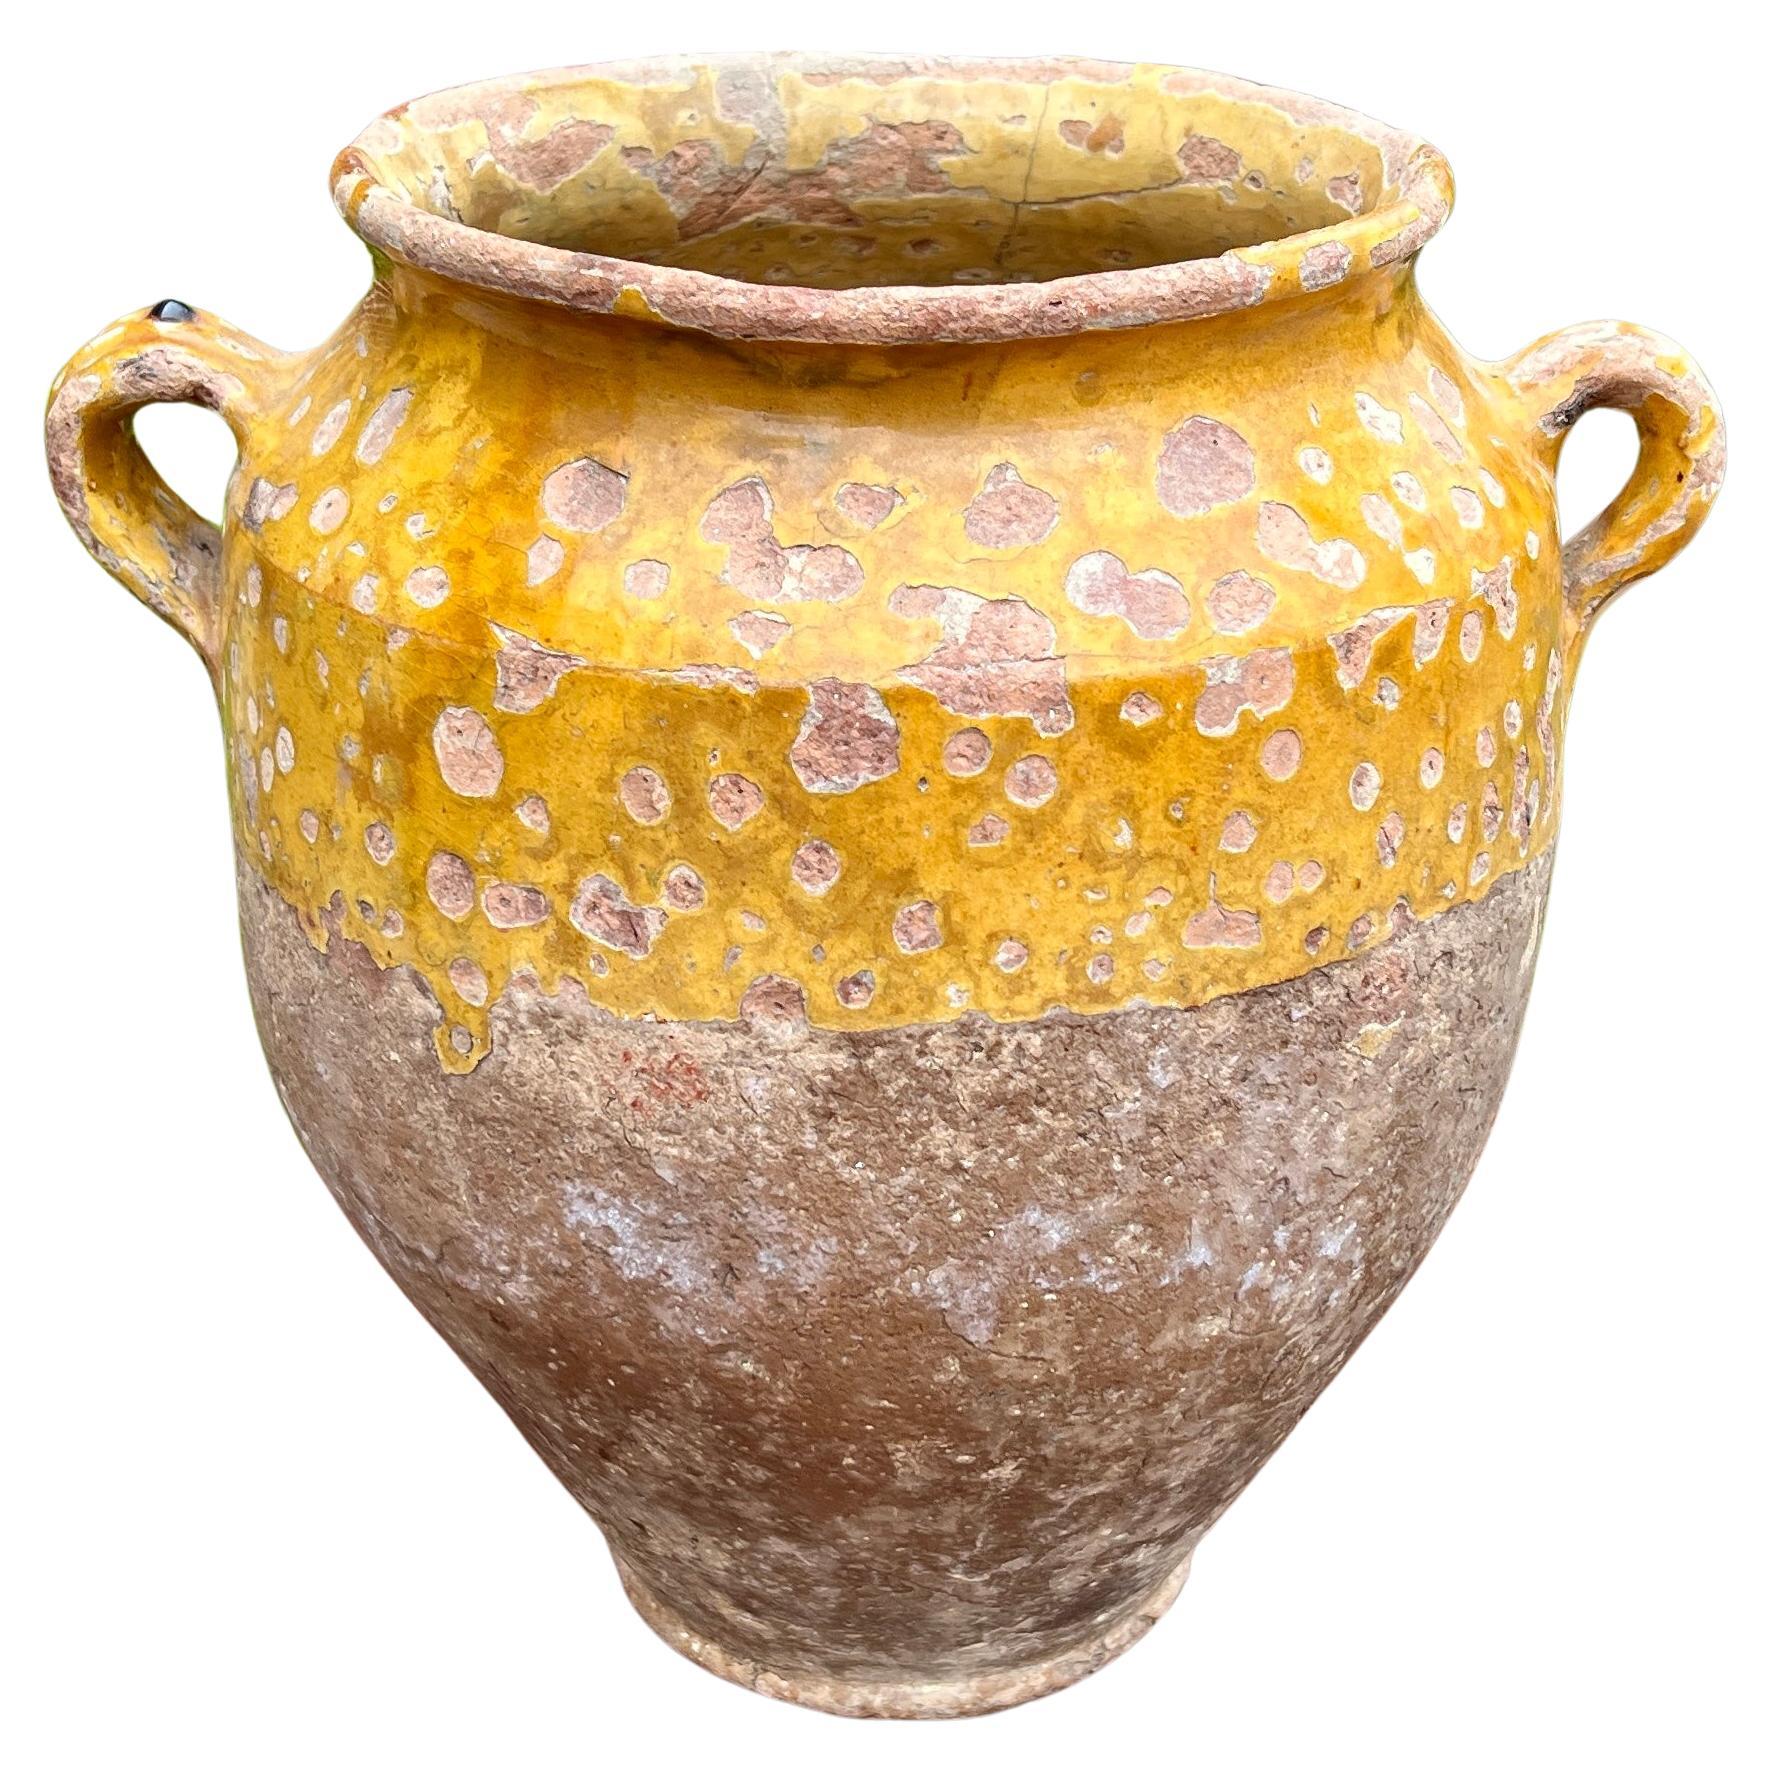 Antique French Country Confit Pot Pottery Jar Jug Glazed Yellow Ochre Large #1 For Sale